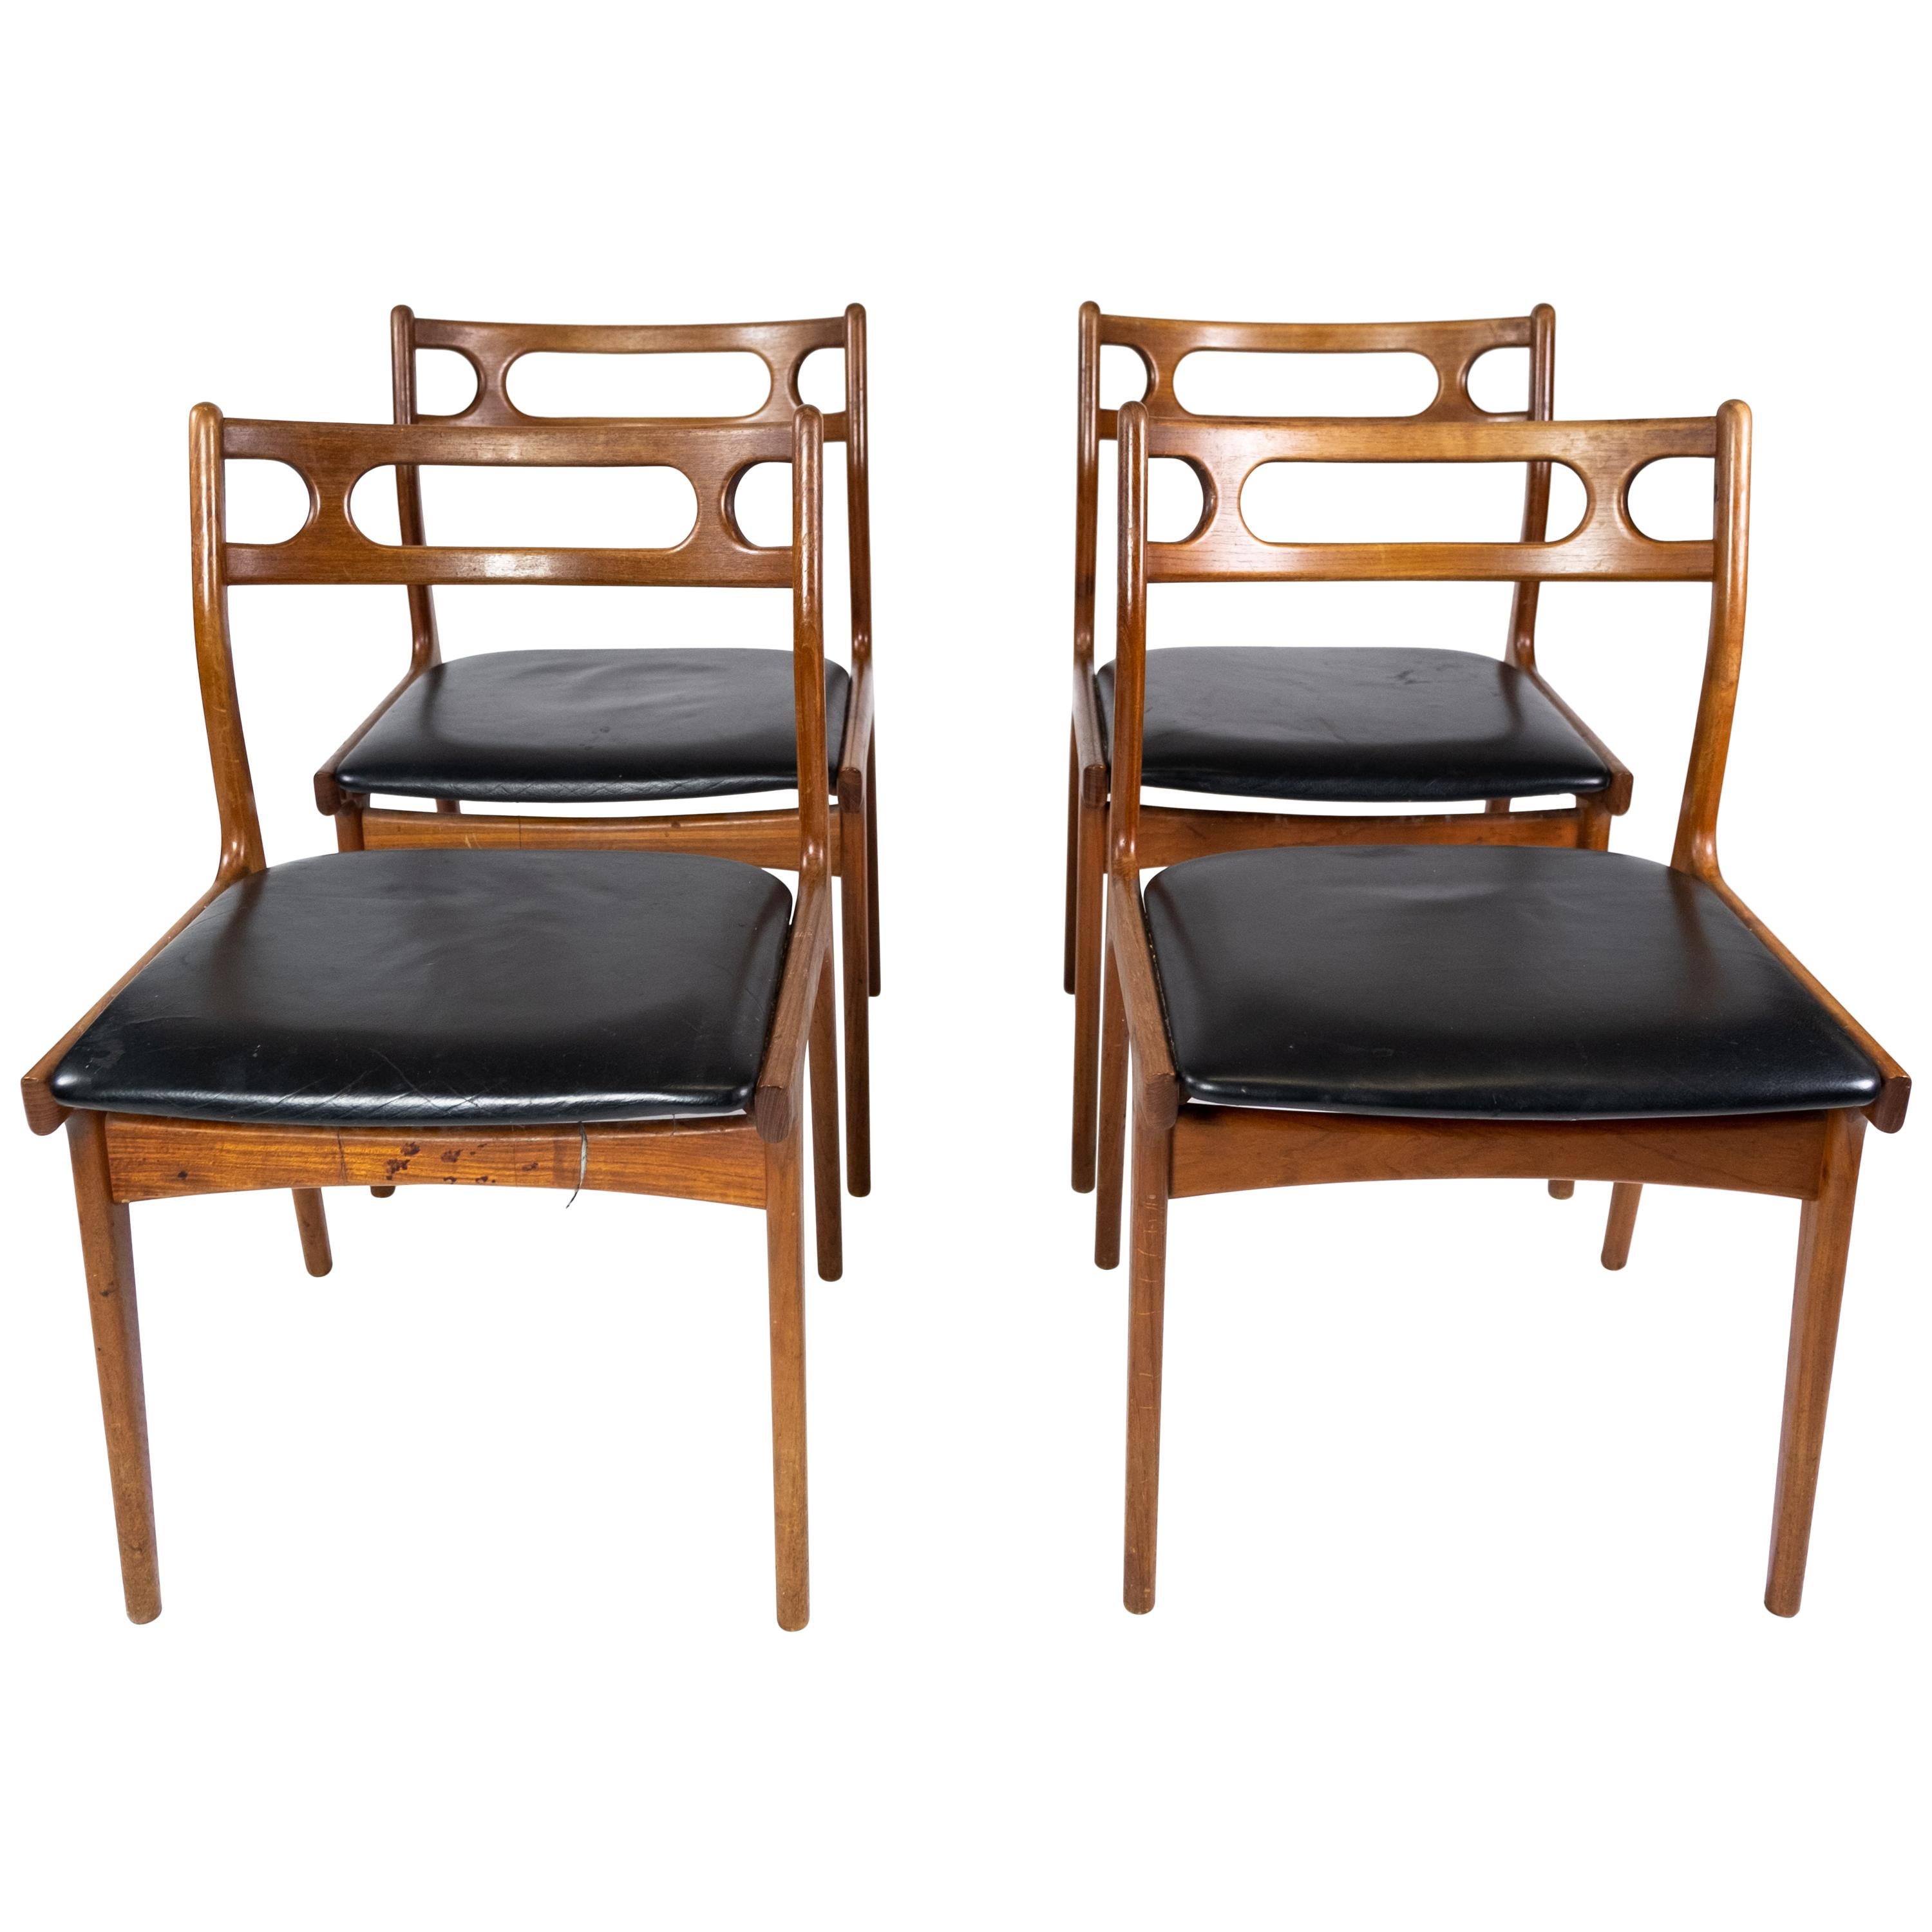 Set of Four Dining Room Chairs of Teak, of Danish Design, 1960s